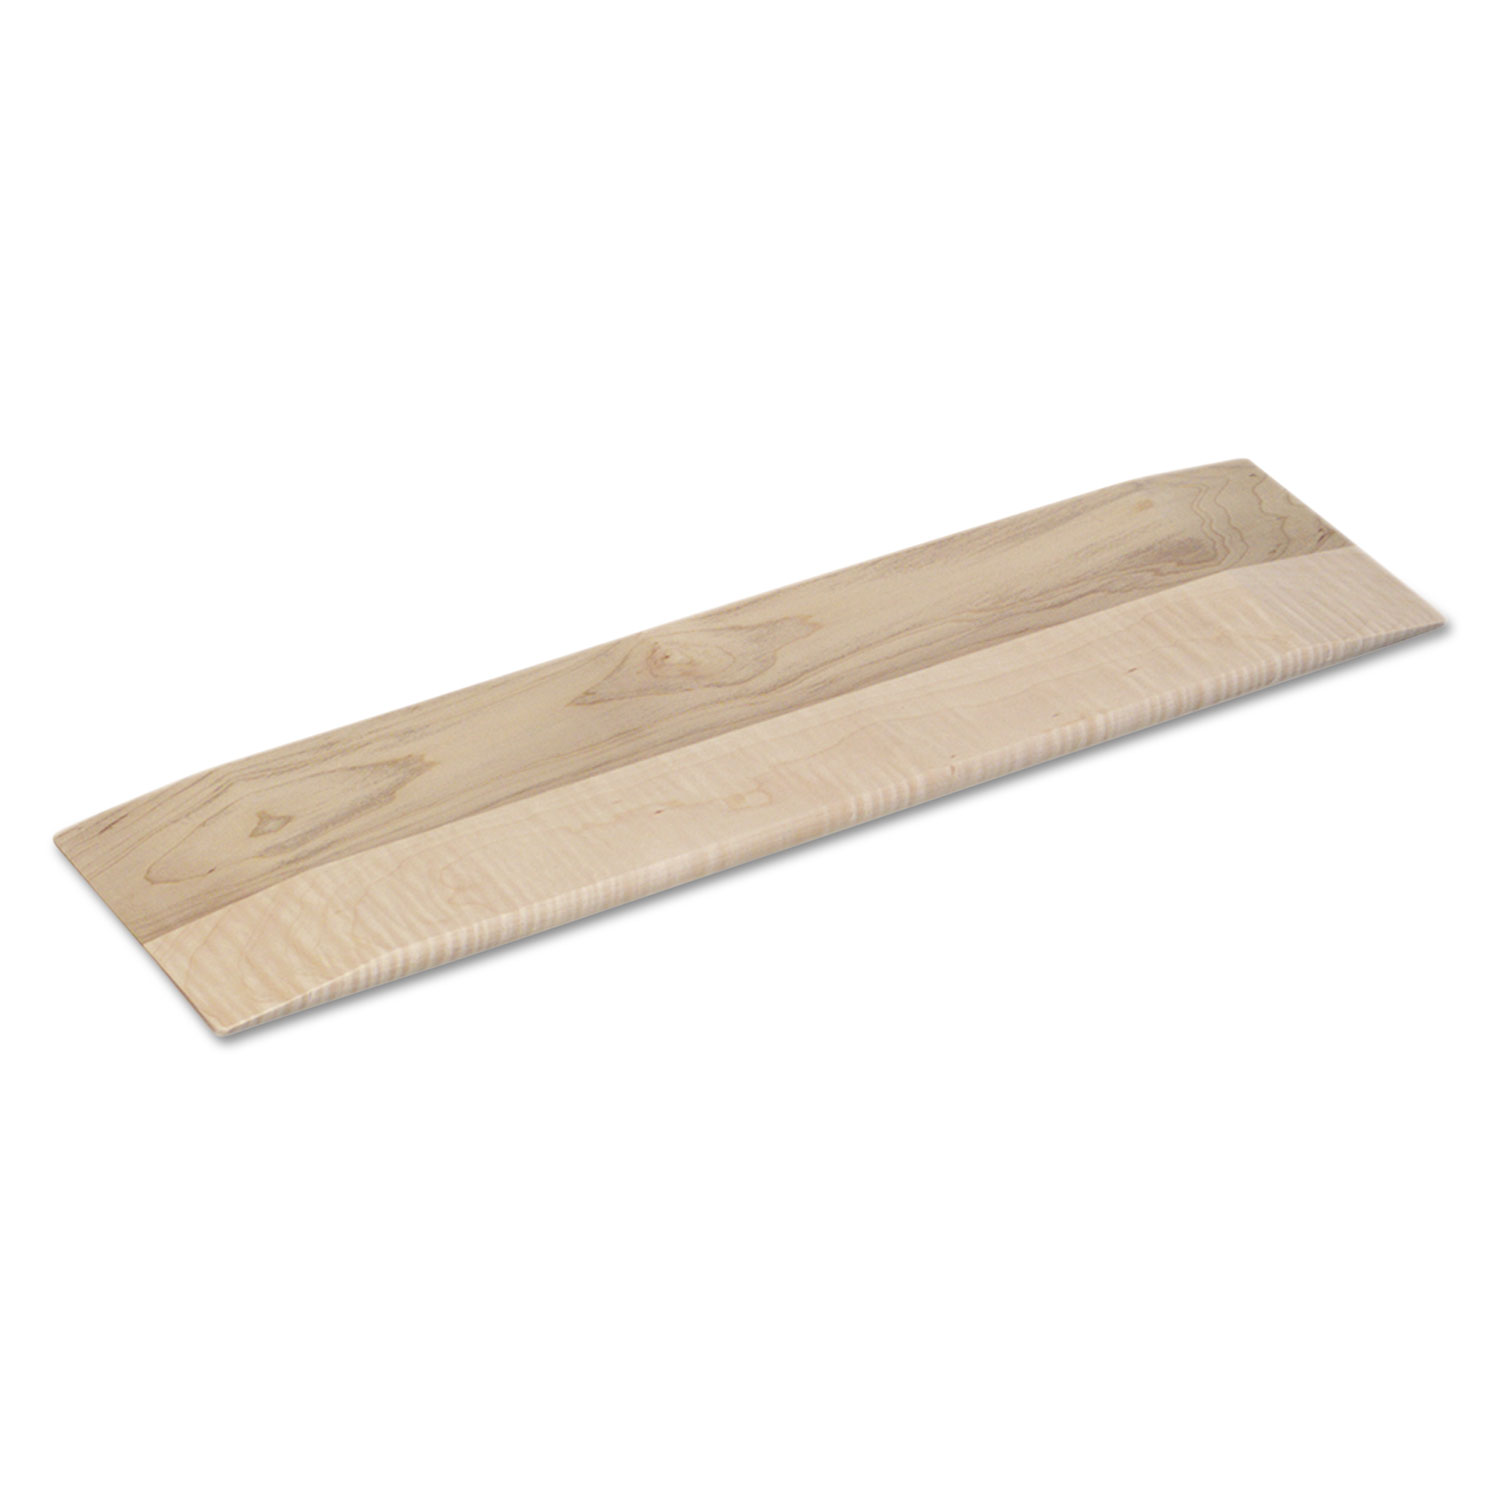 Deluxe Wood Transfer Boards, 30 x 8, Southern Yellow Pine, 440 lb Capacity